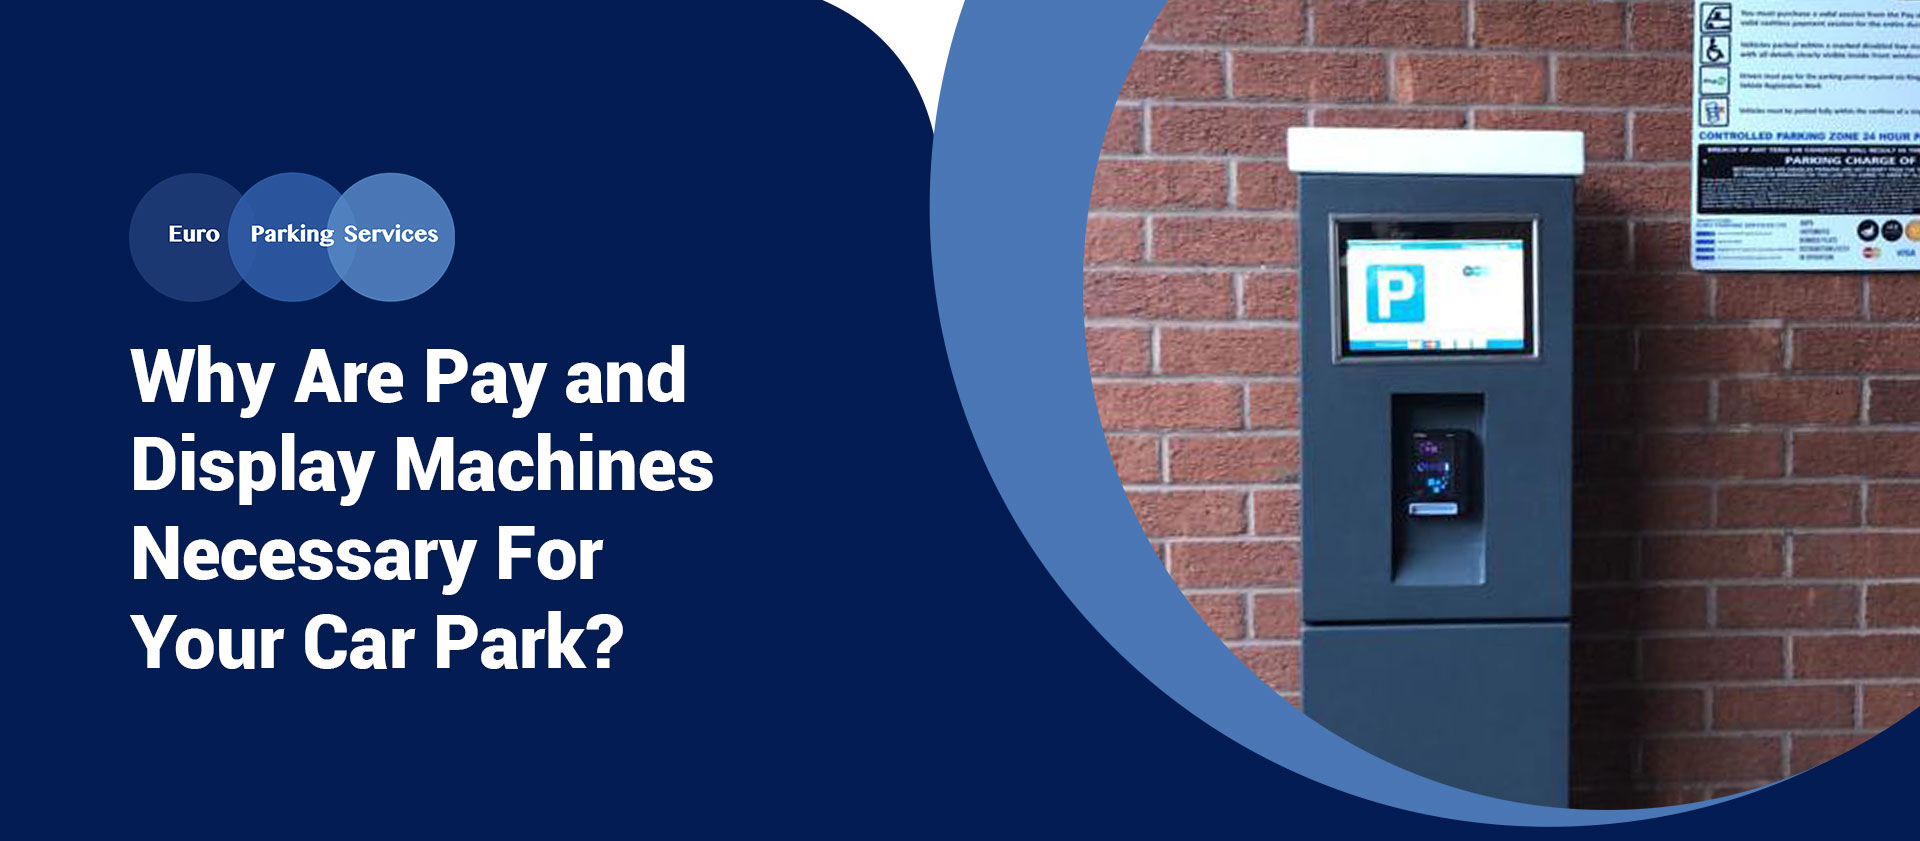 Why Are Pay and Display Machines Necessary For Your Car Park